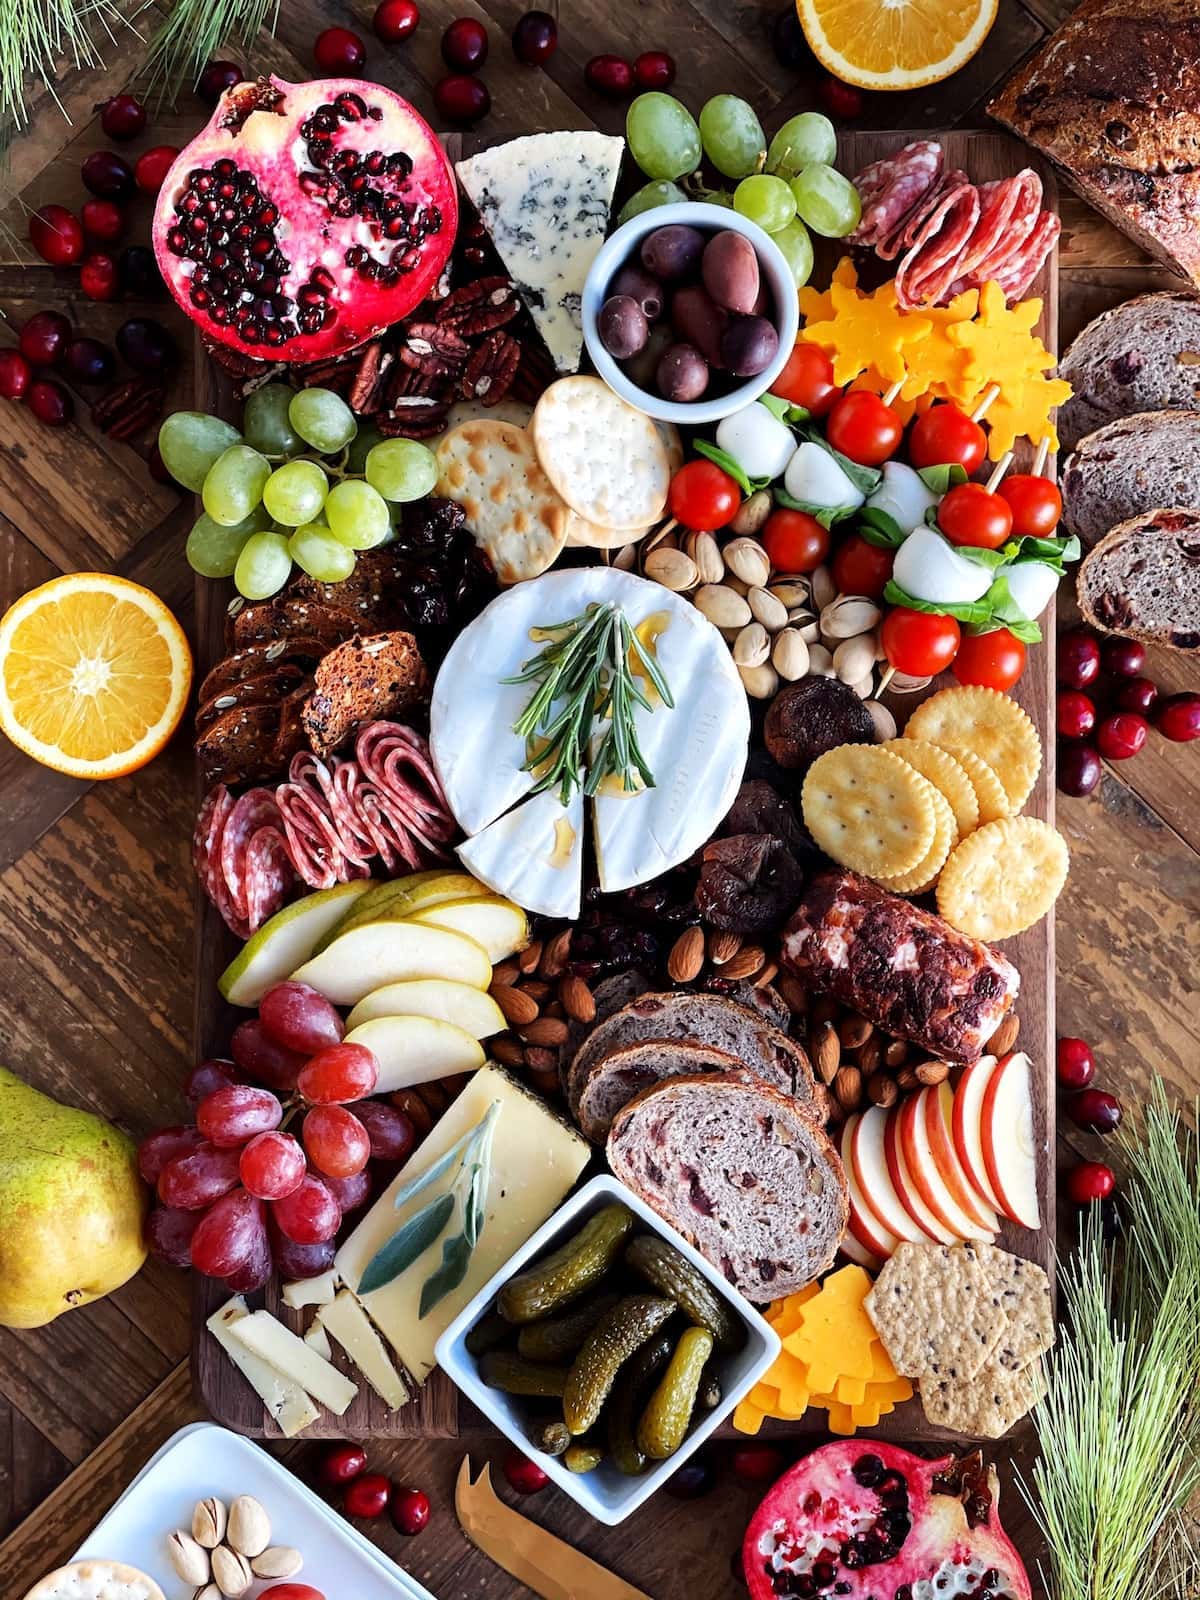 https://www.twopeasandtheirpod.com/wp-content/uploads/2020/11/Holiday-Cheese-Board-1.jpg